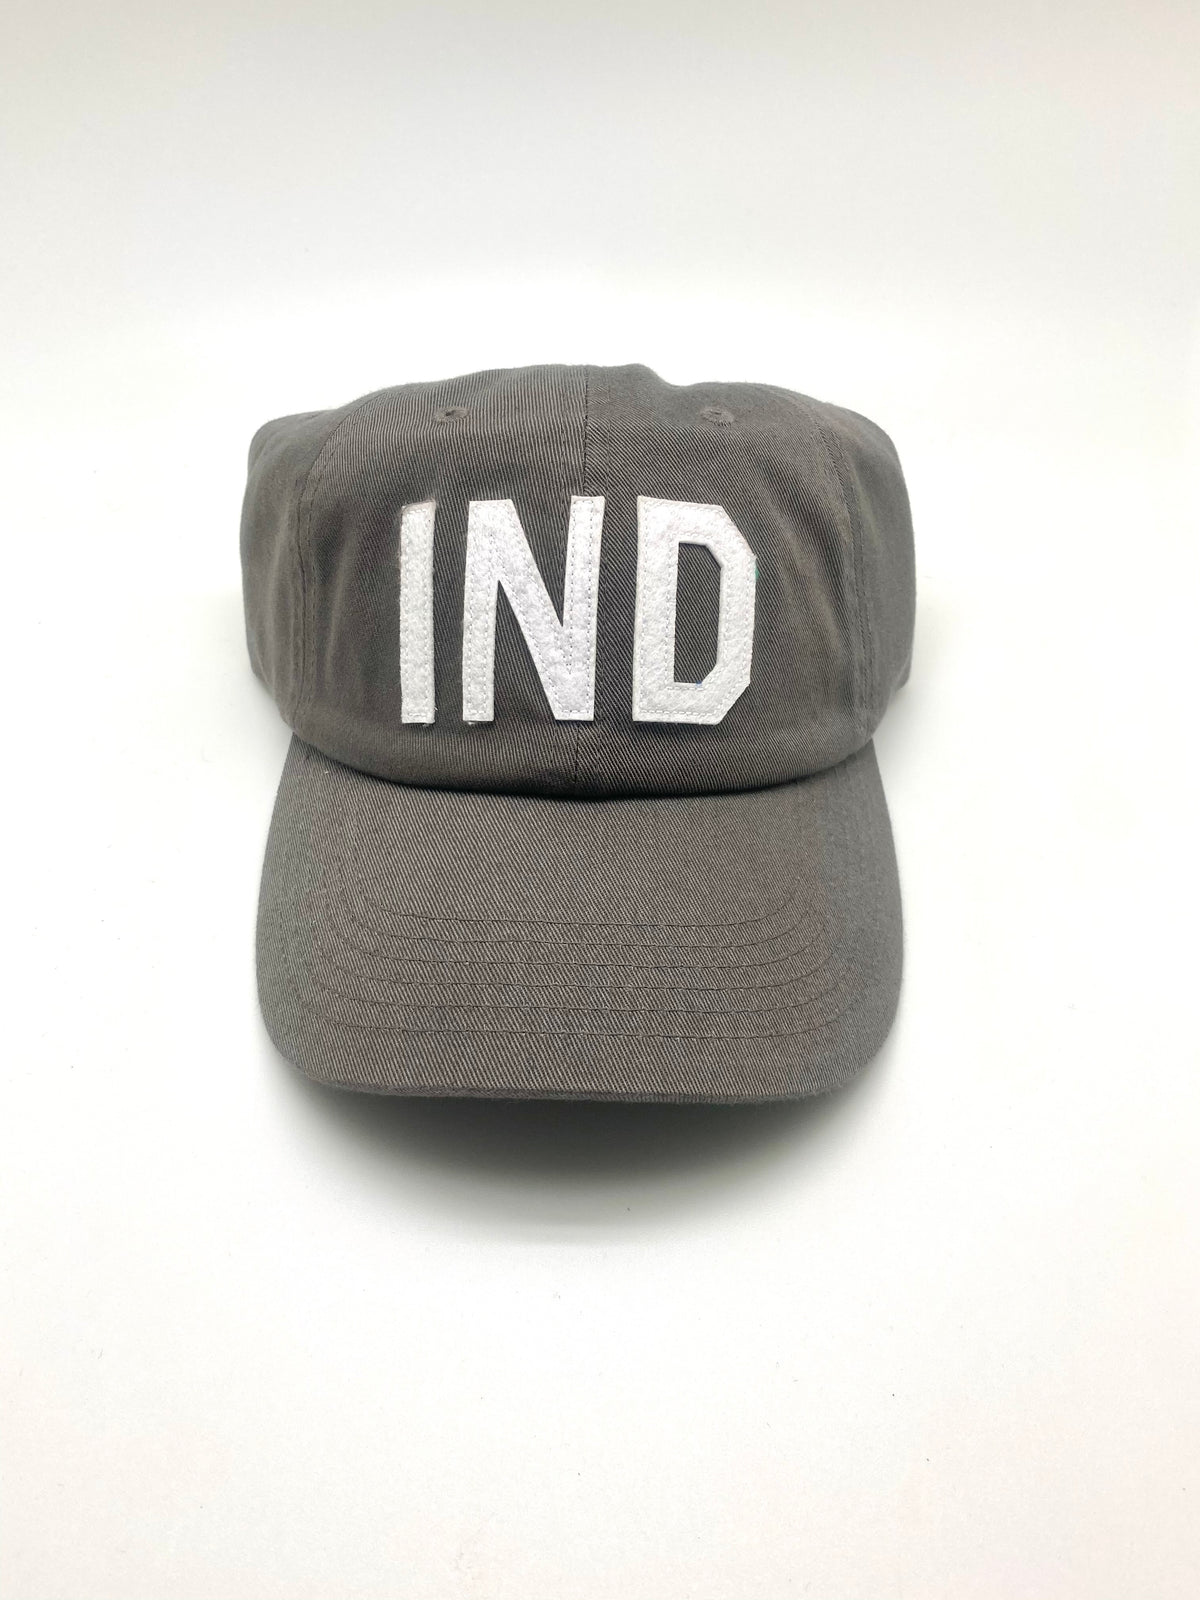 IND - Indianapolis, IN Hat